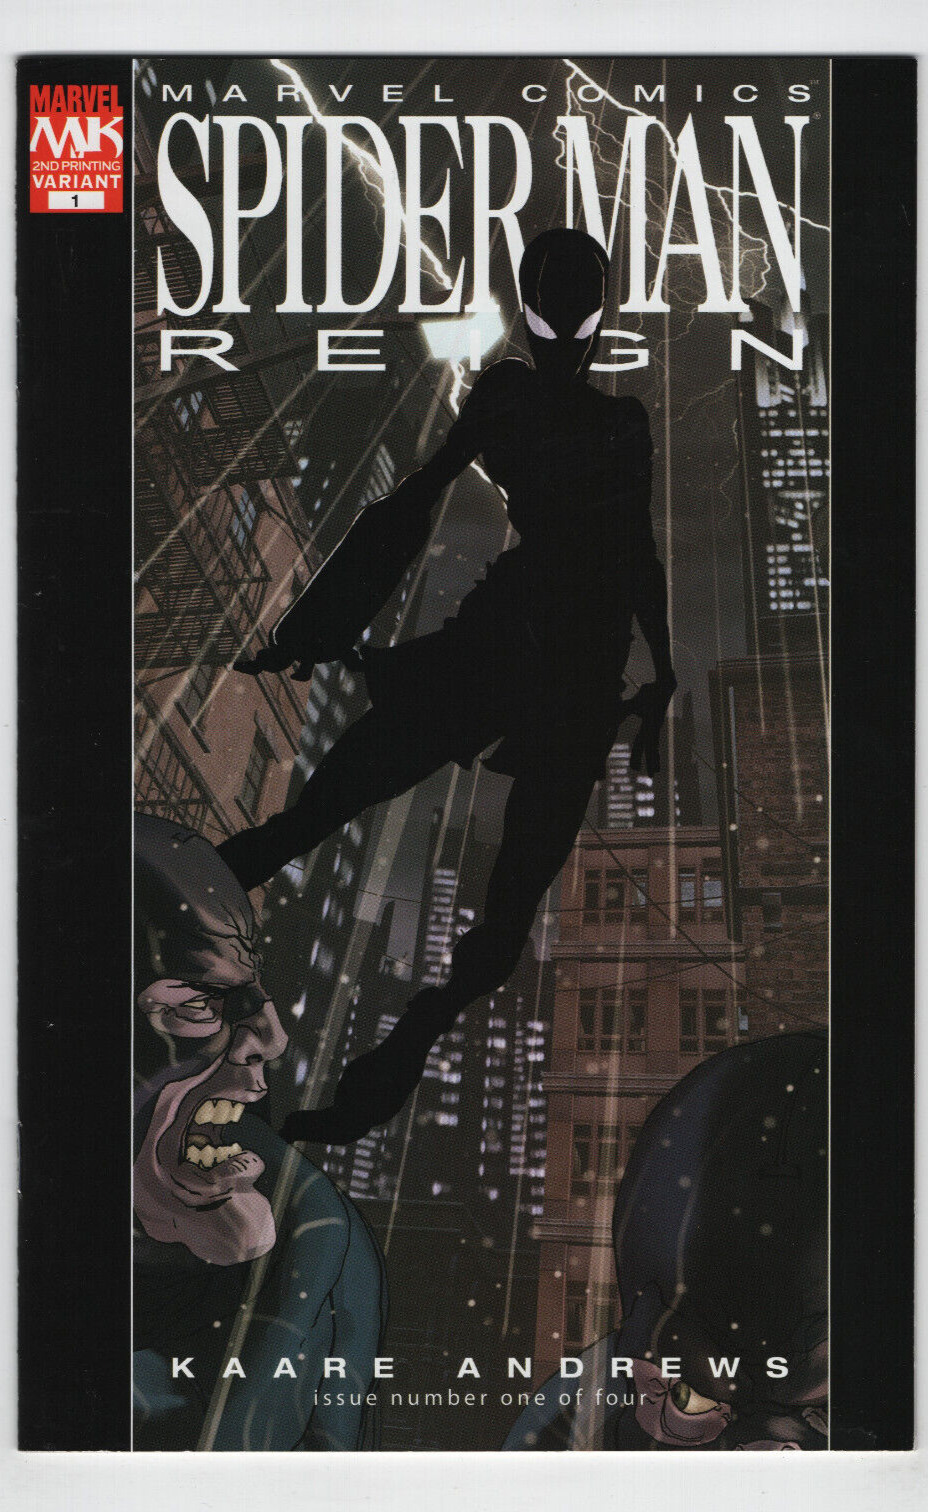 SPIDER-MAN REIGN #1 2ND PRINT KAARE ANDREWS VARIANT SYMBIOTE COVER MARVEL COMICS